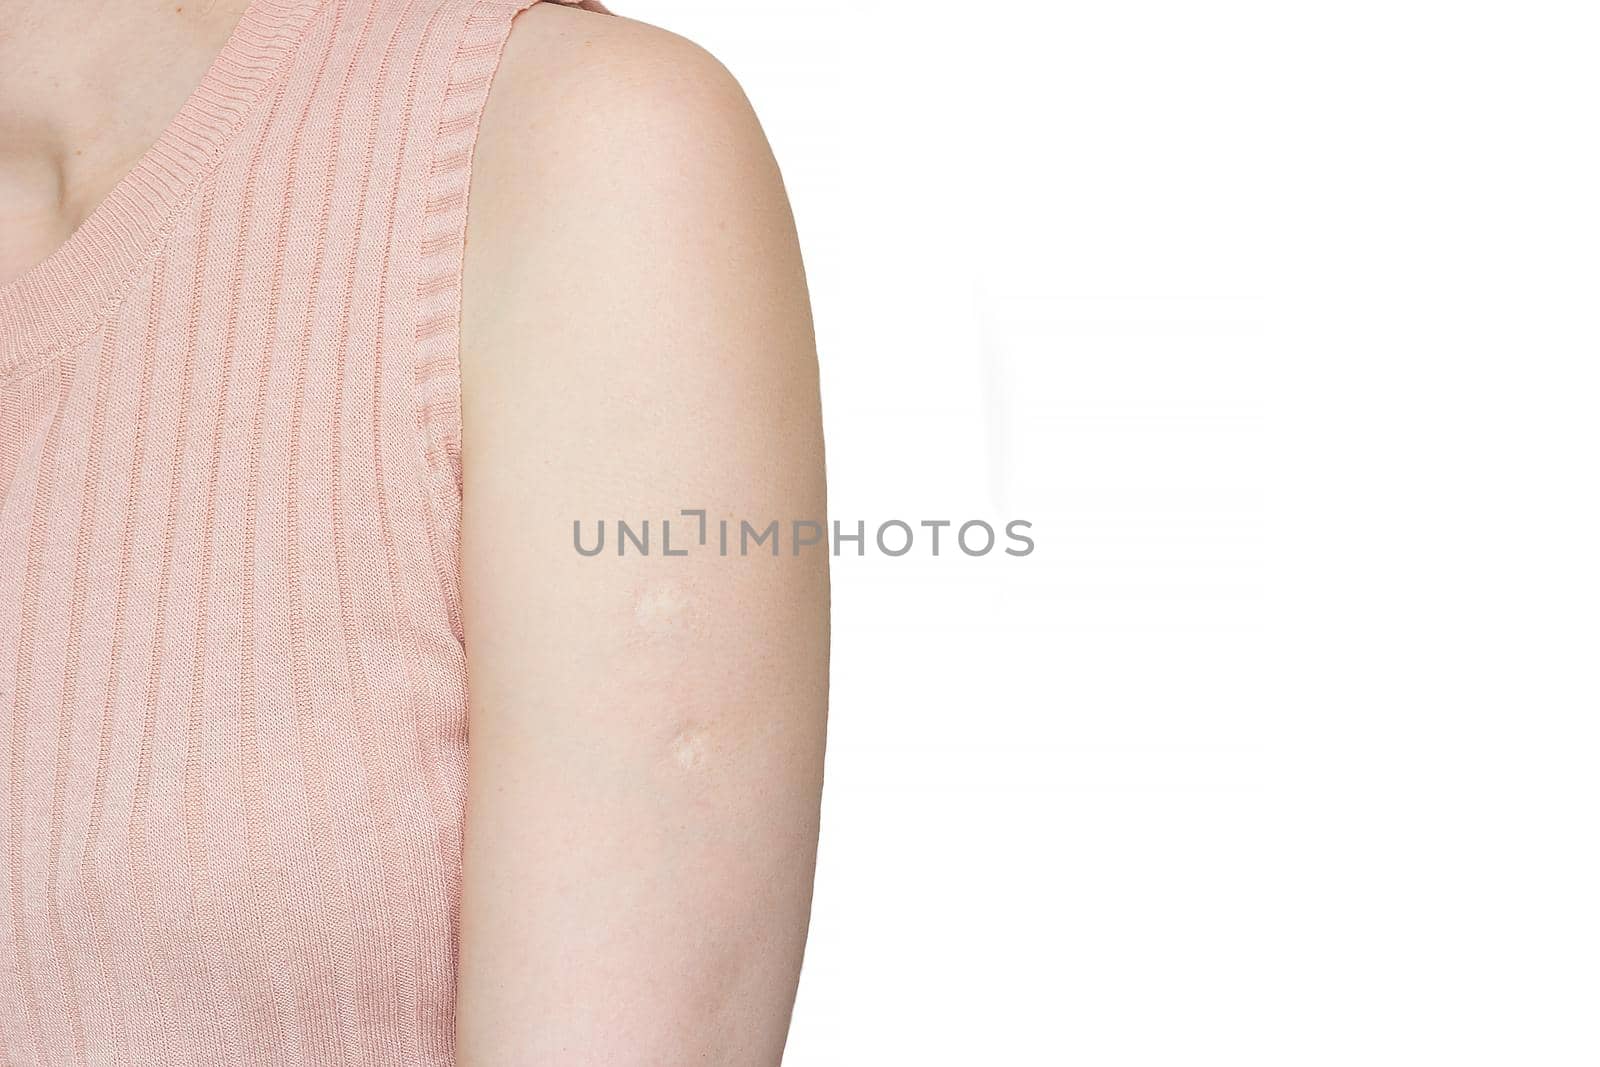 Two tuberculosis vaccine BCG marks made in childhood are visible on the shoulder of an adult woman